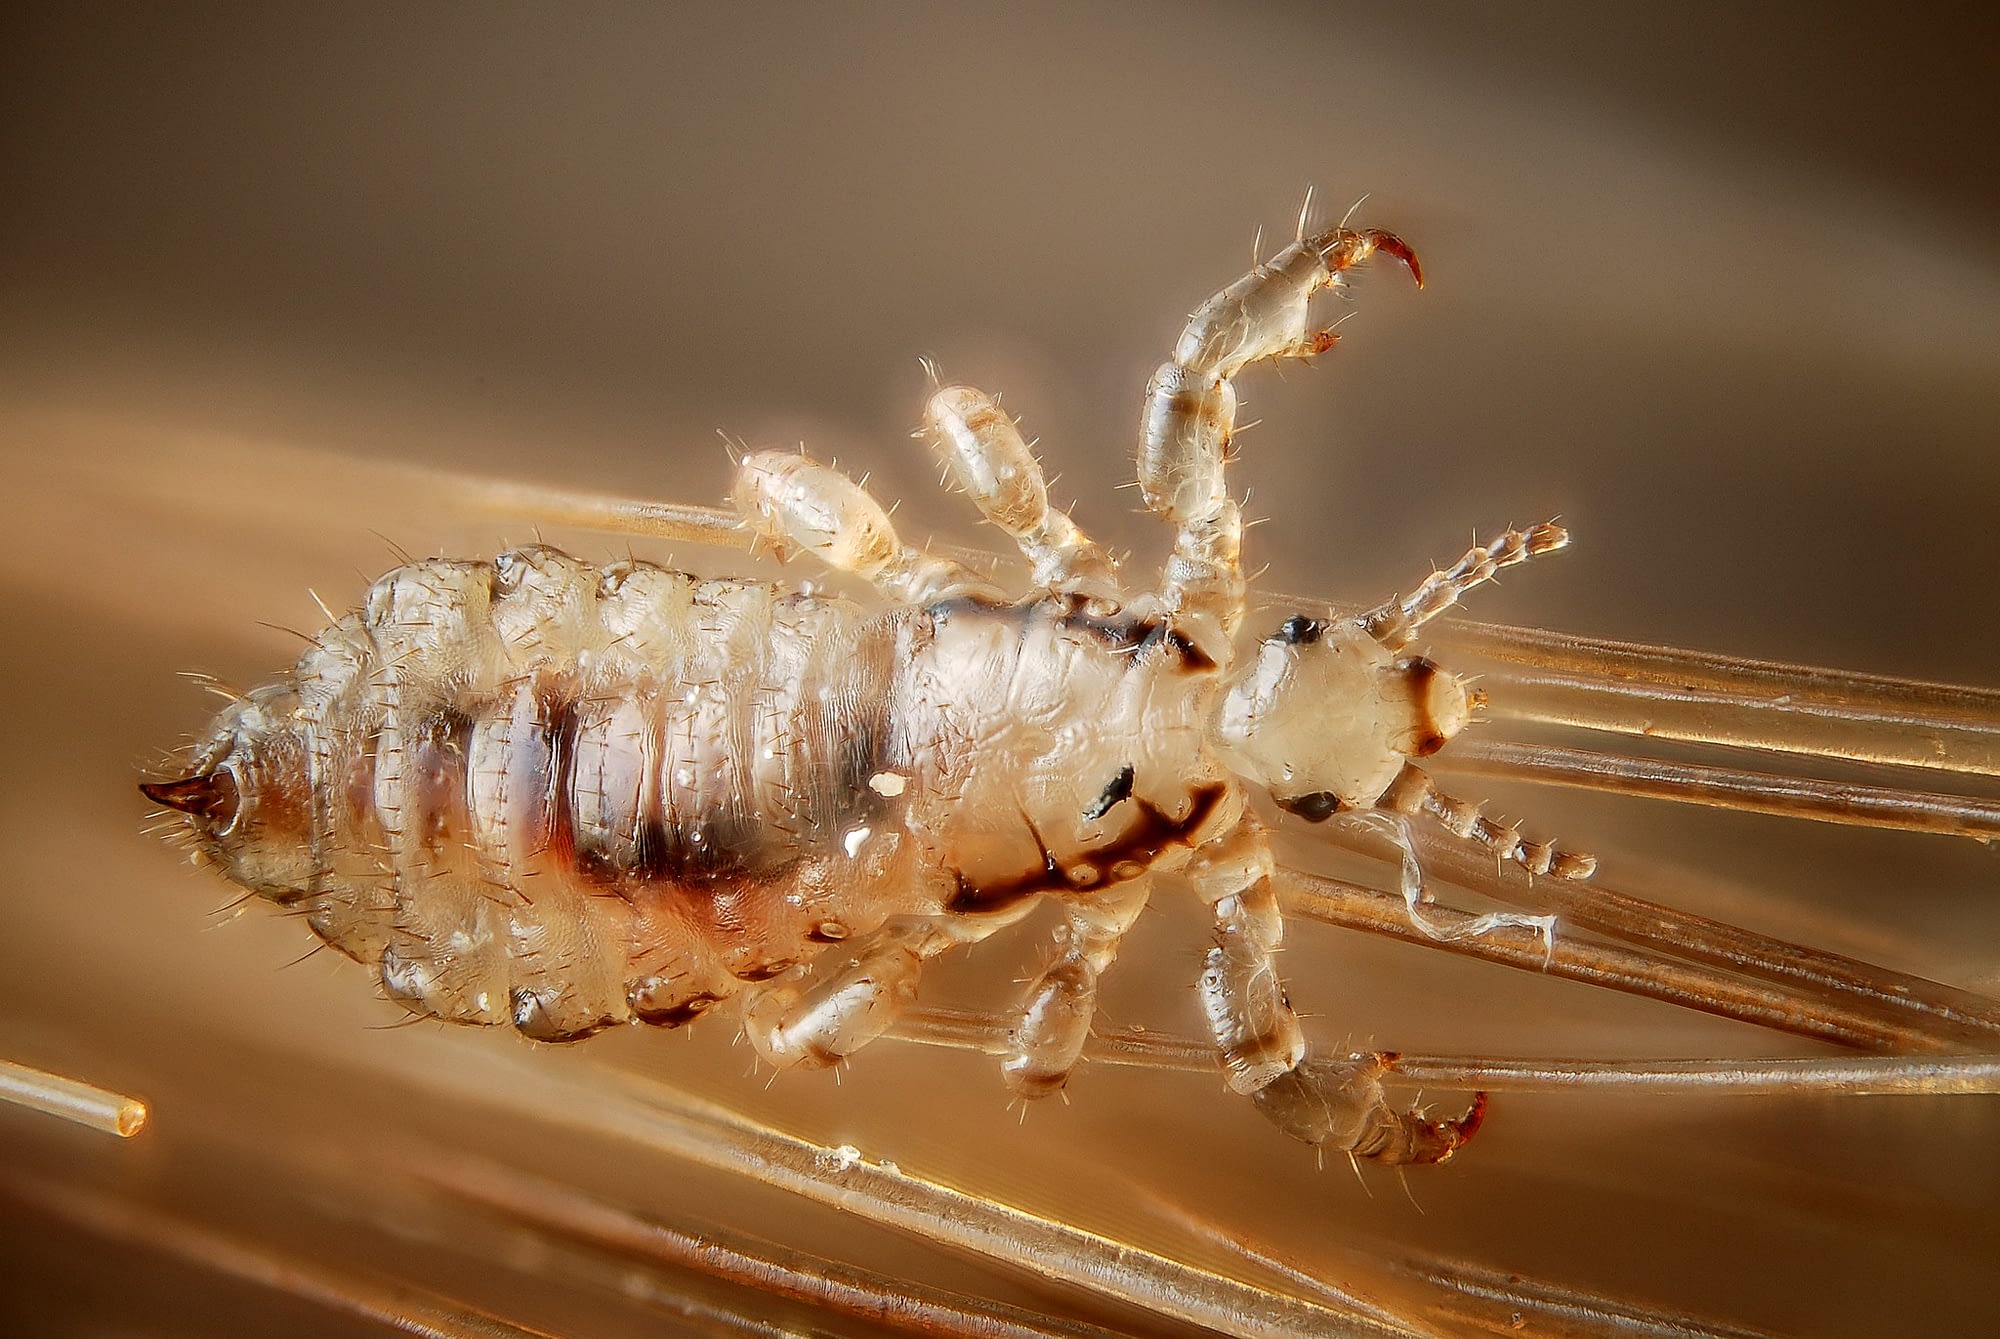 lice in hair of animal